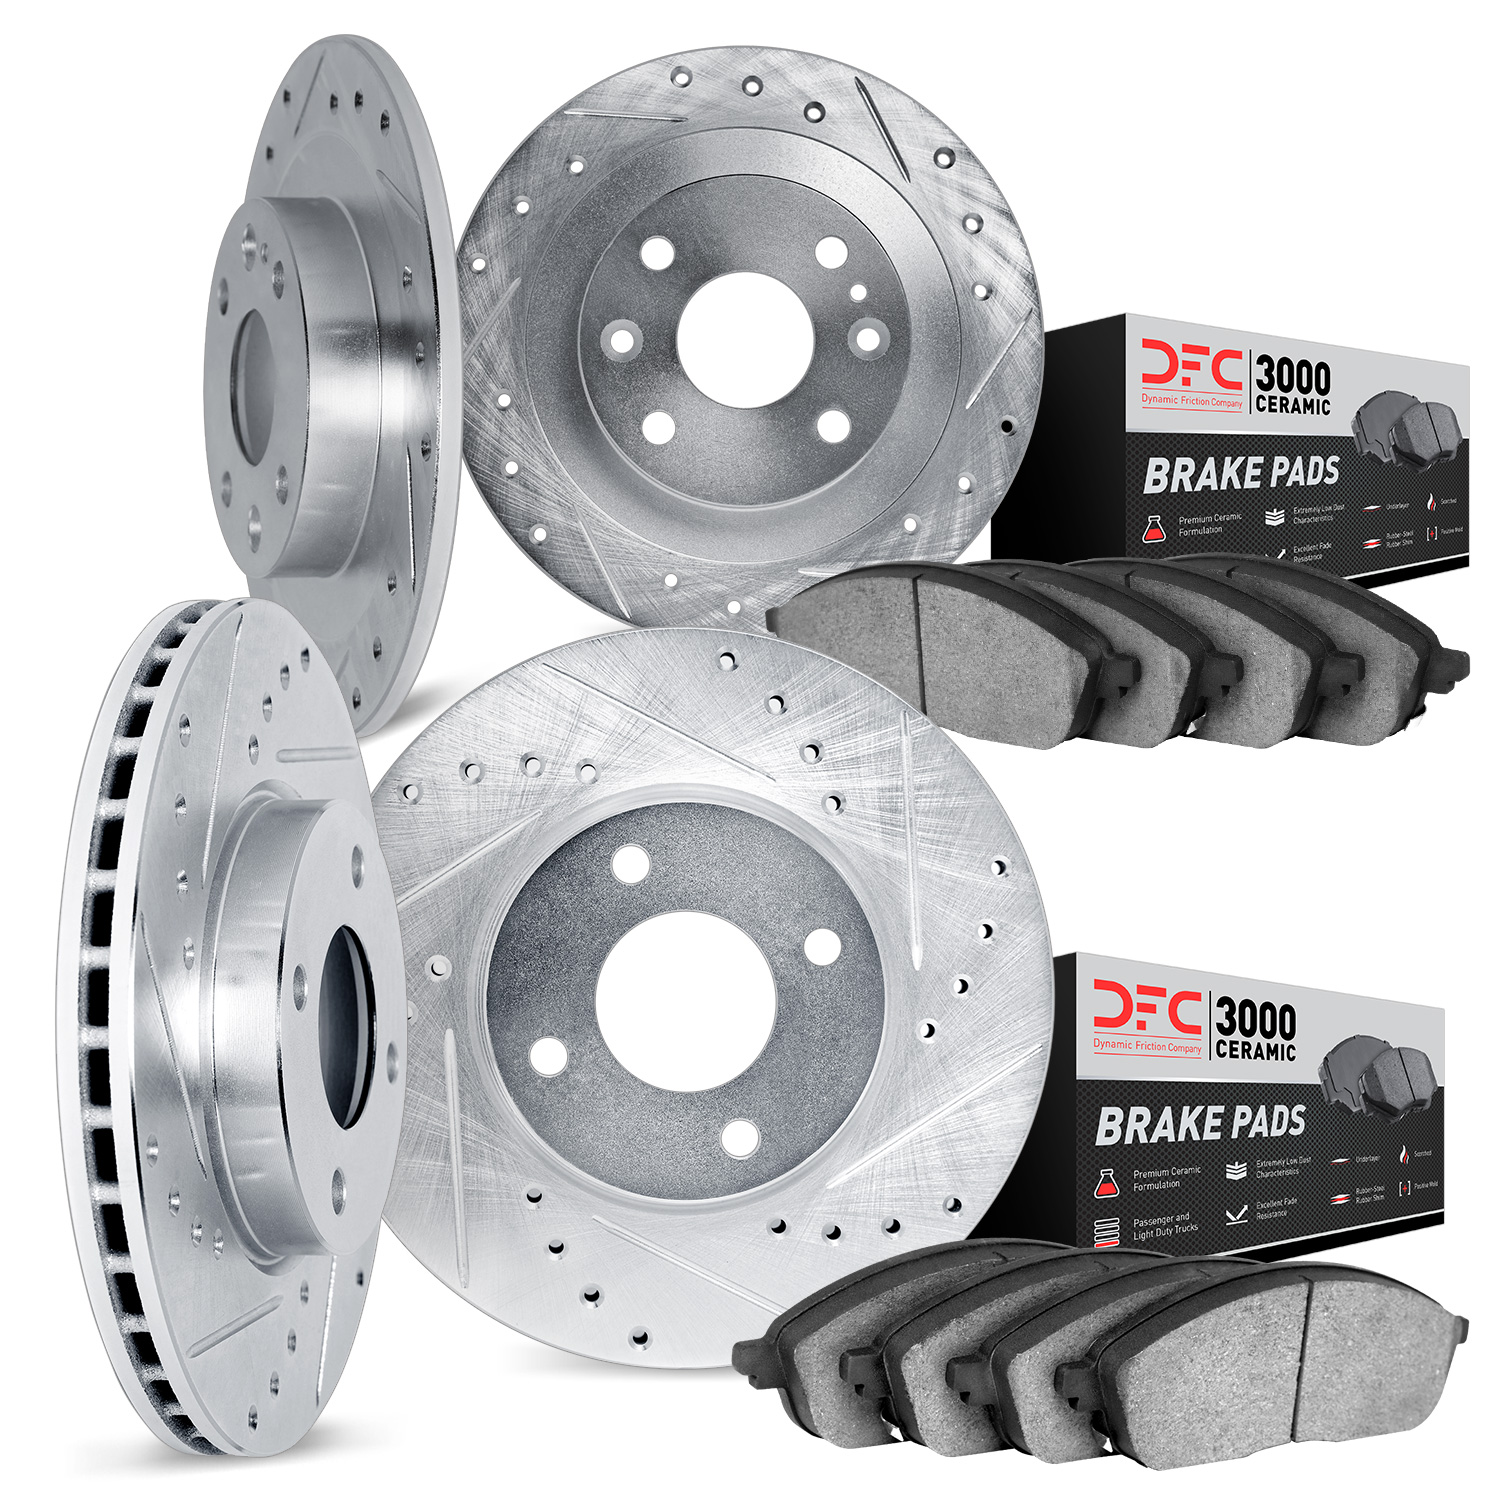 7304-80035 Drilled/Slotted Brake Rotor with 3000-Series Ceramic Brake Pads Kit [Silver], Fits Select Multiple Makes/Models, Posi